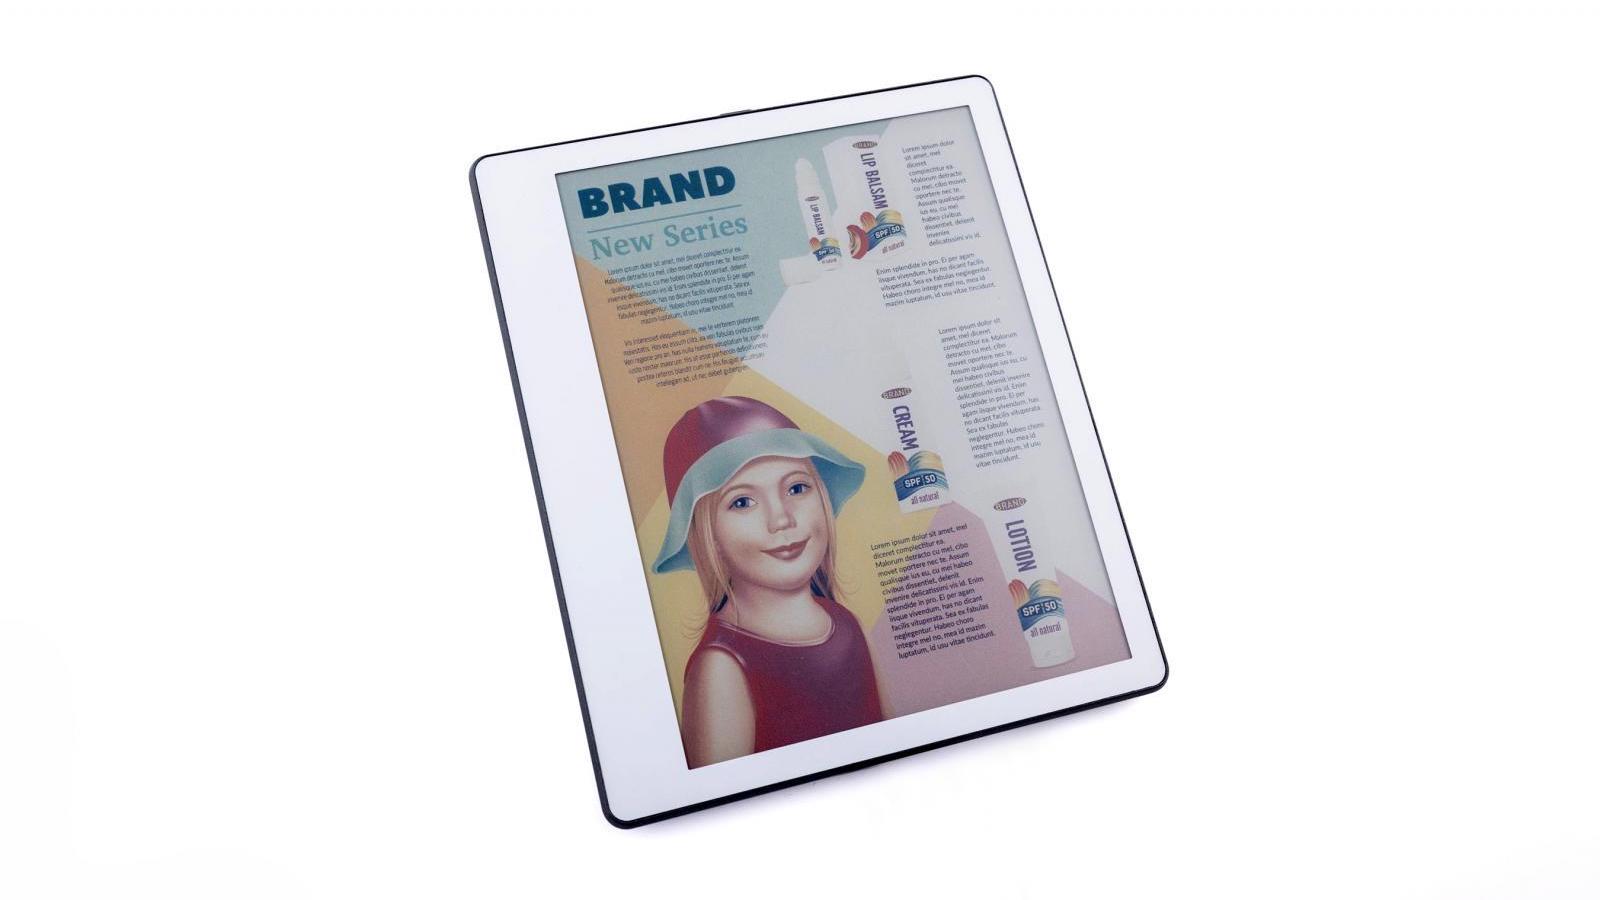 PocketBook's latest e-reader first to use new E Ink color display tech